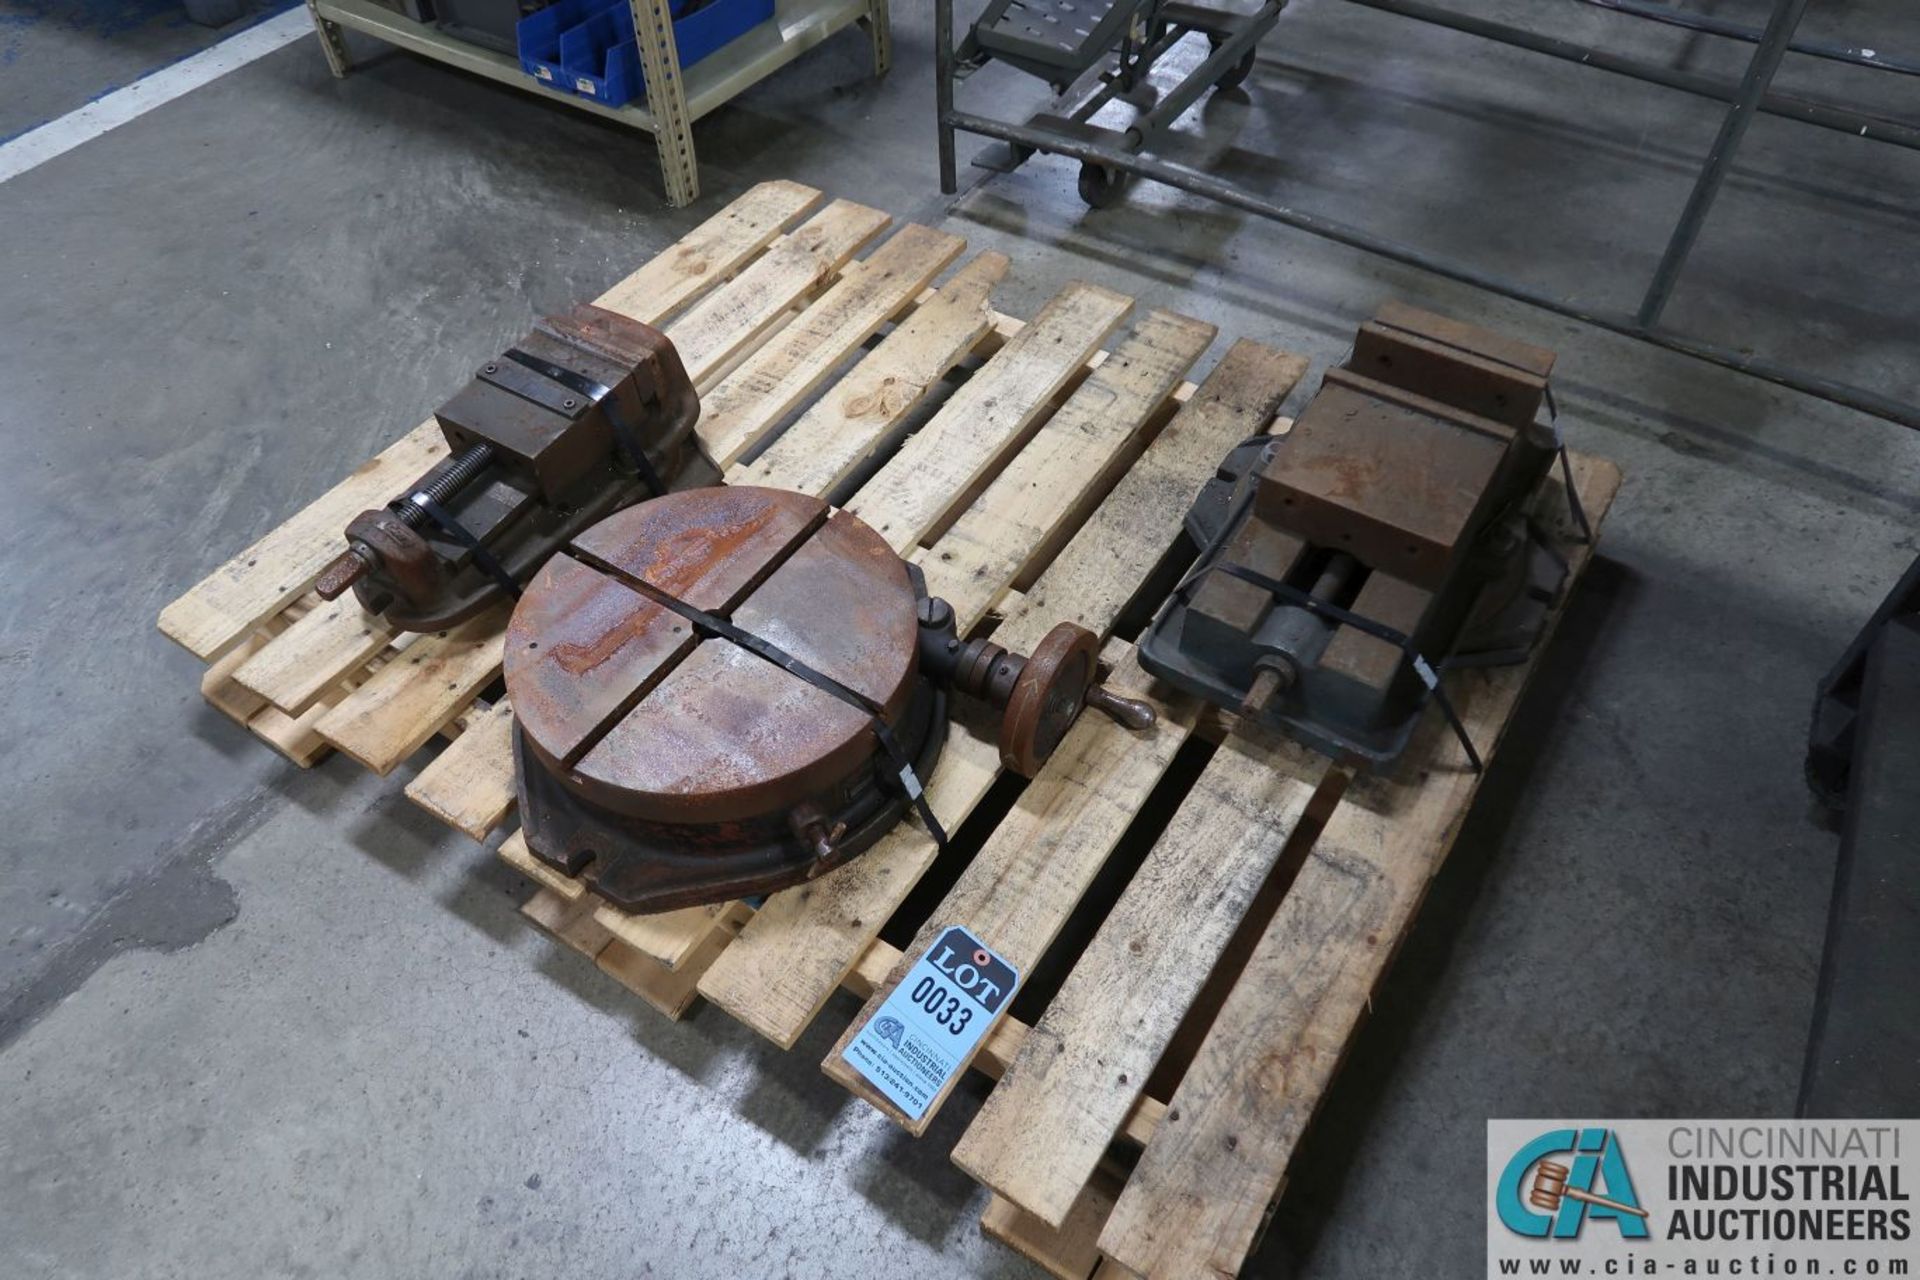 (LOT) 15" TROYKE MODEL BH-15 ROTARY TABLE WTIH 8" AND 6" SWIVEL BASE VISES